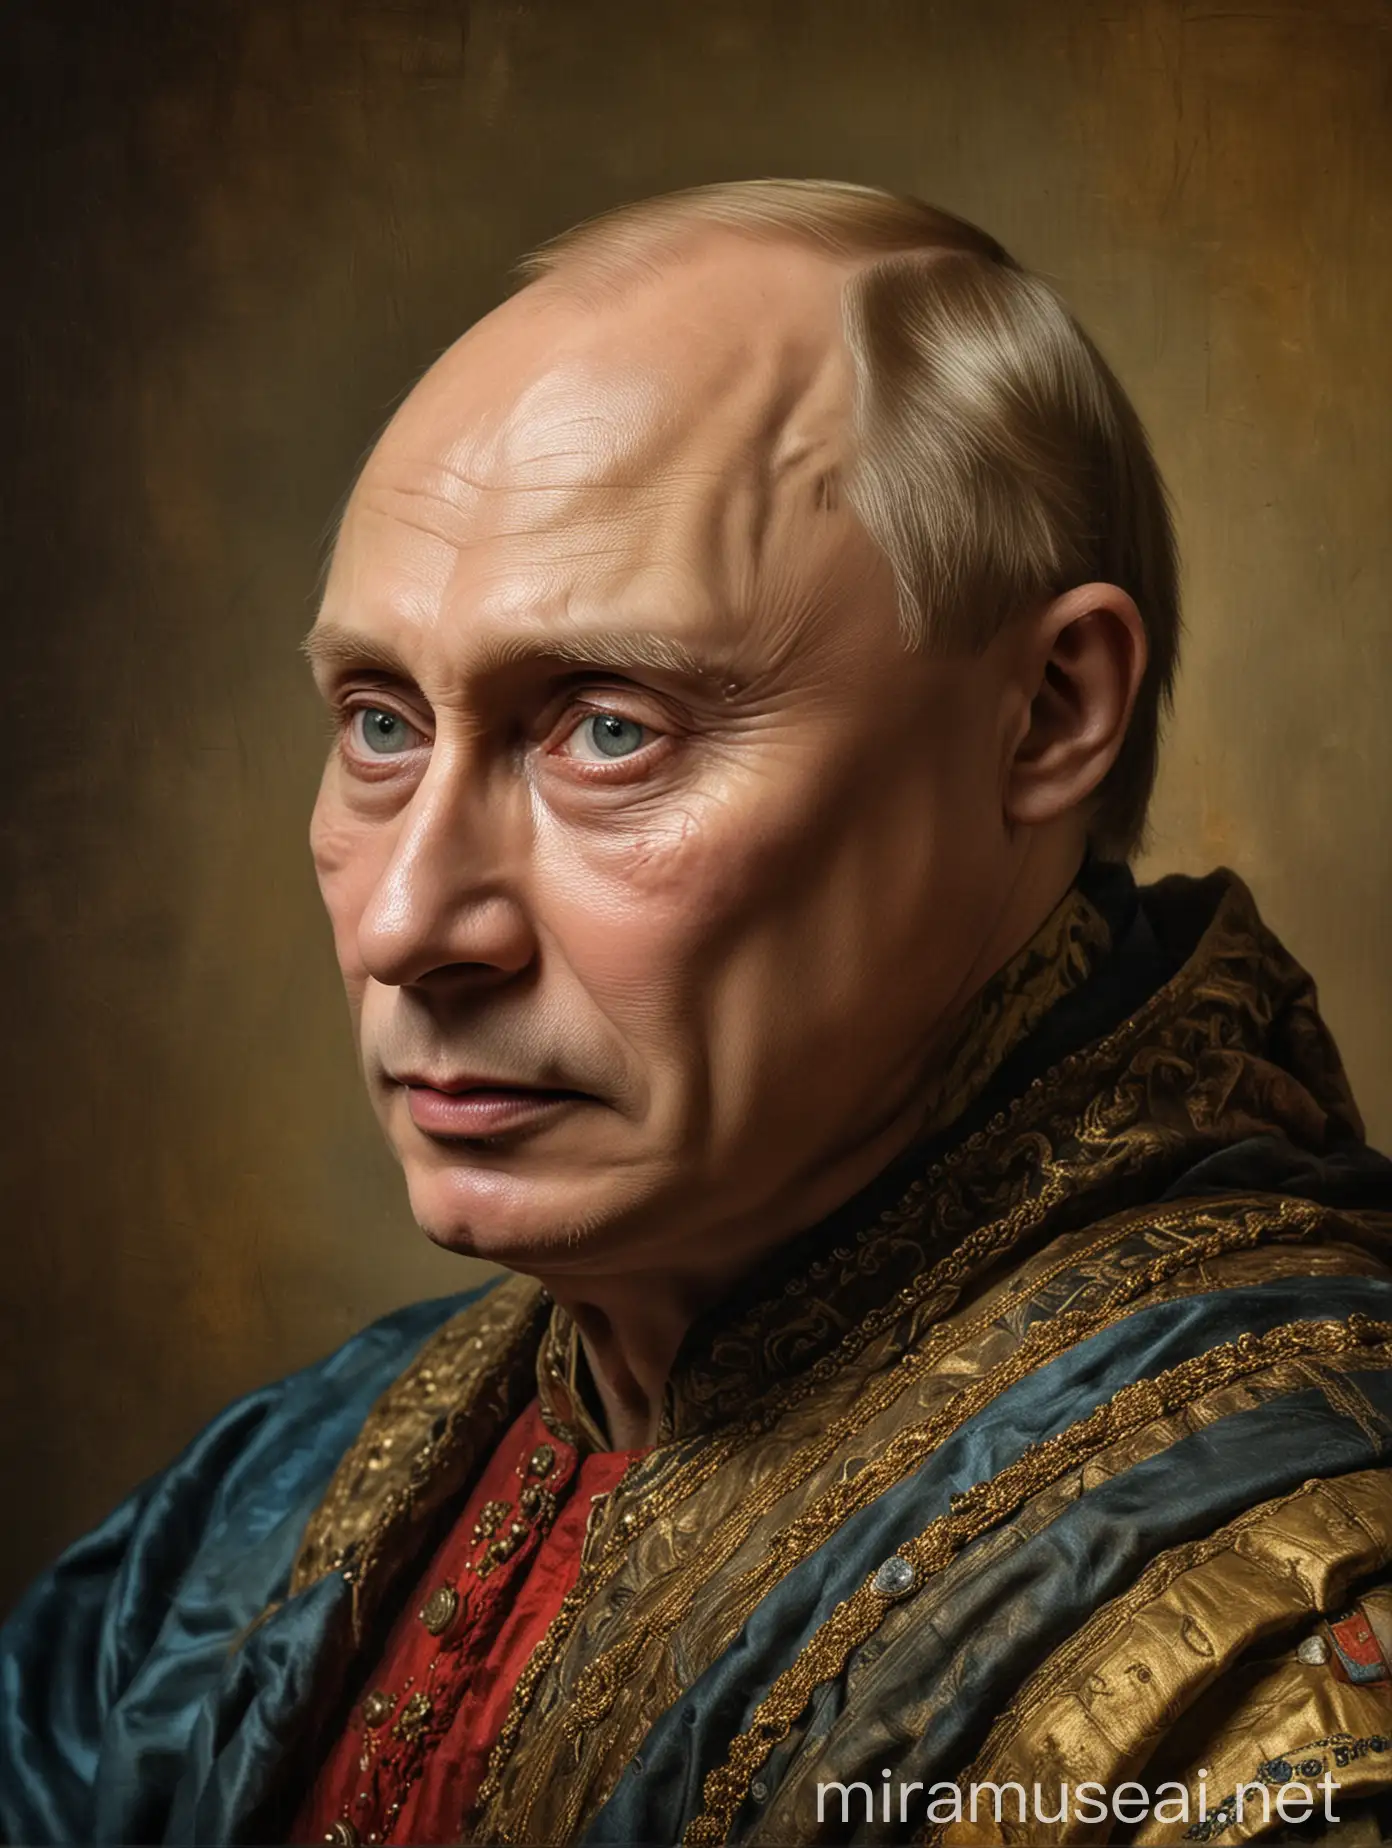 Portrait of Vladimir Putin in Rembrandt Style Old Masters Painting with Vermeers Influence